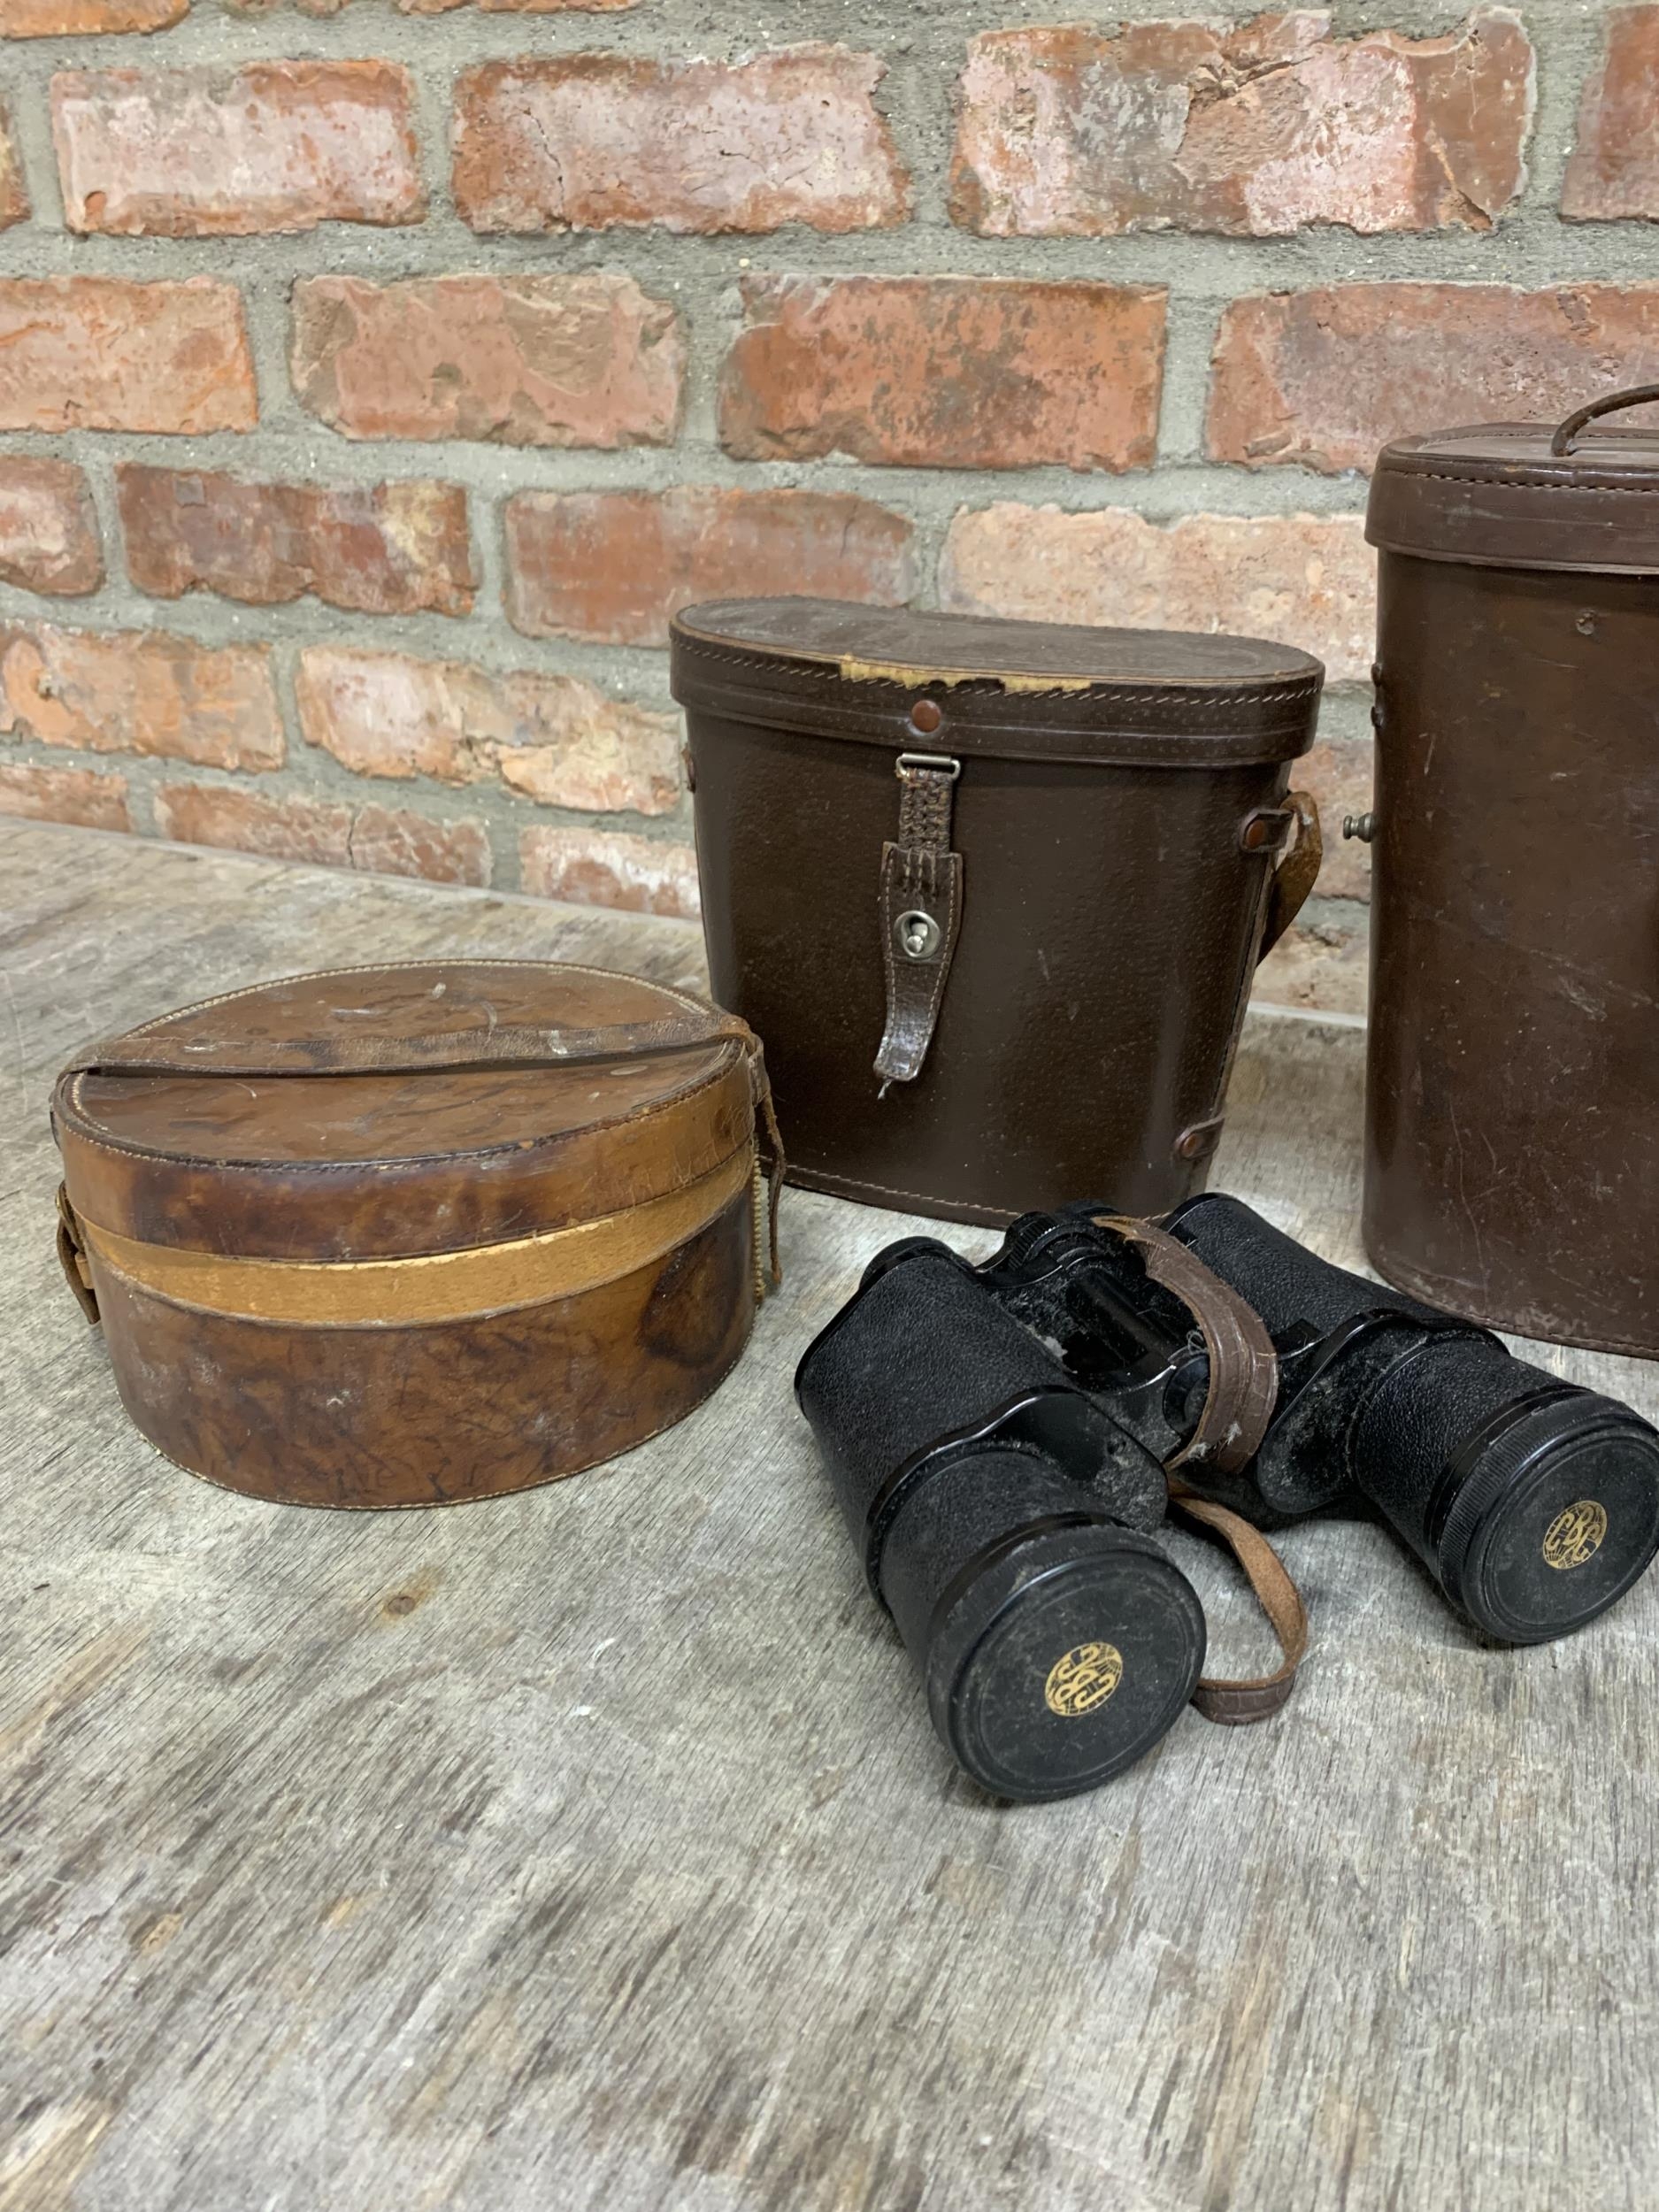 Pair of CBC binoculars 10 x 50 in leather case, with three further leather cases (4) - Image 3 of 3